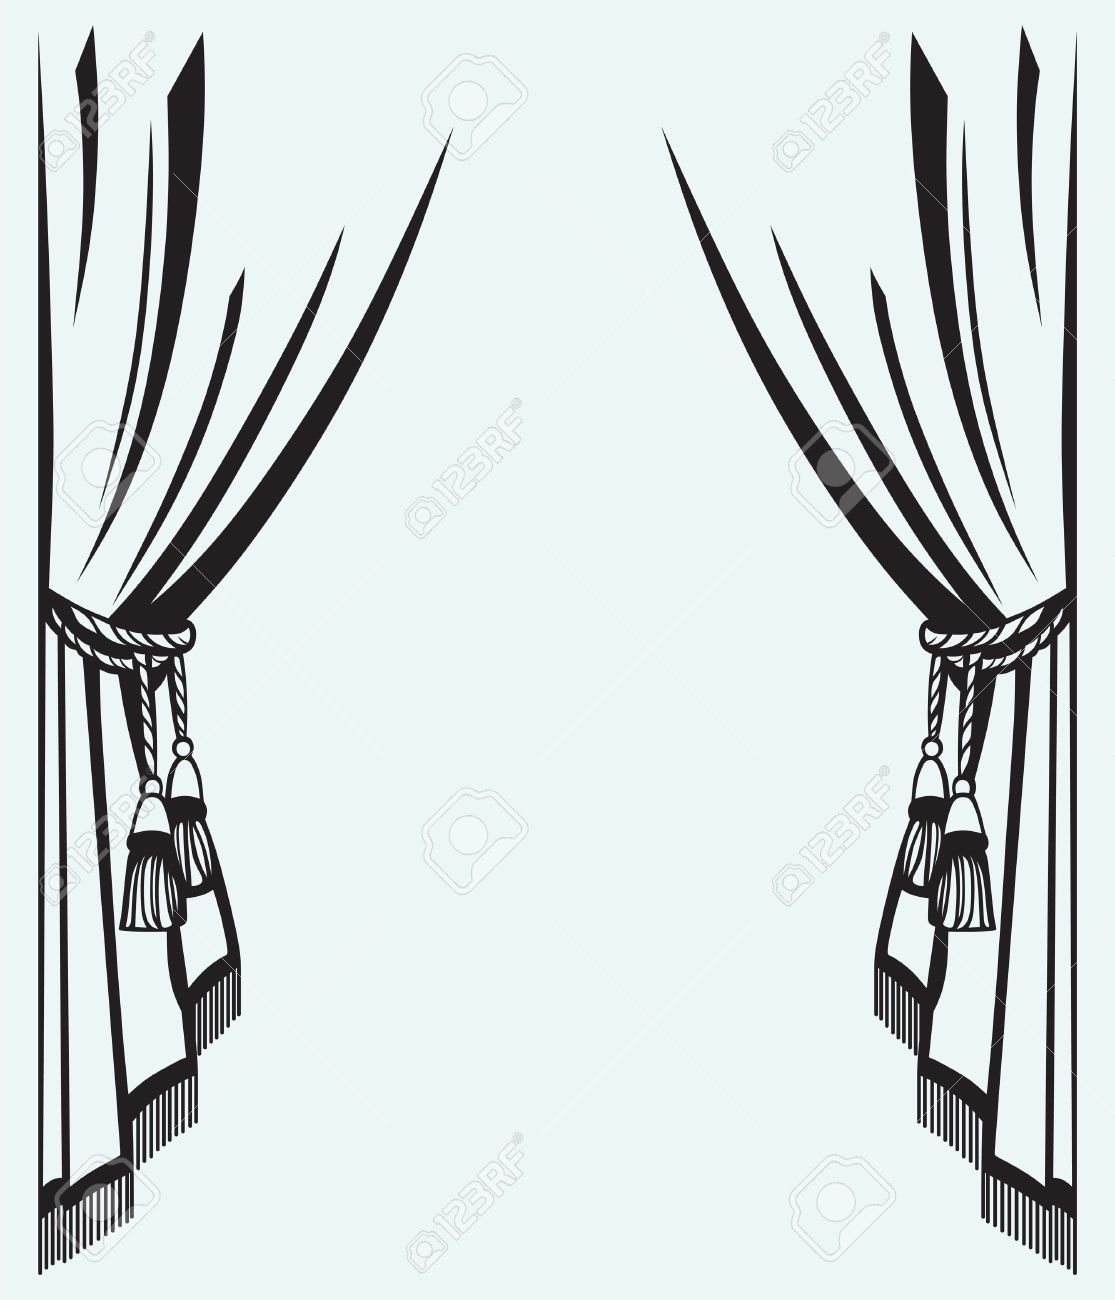 Cinema curtain line drawing vector image